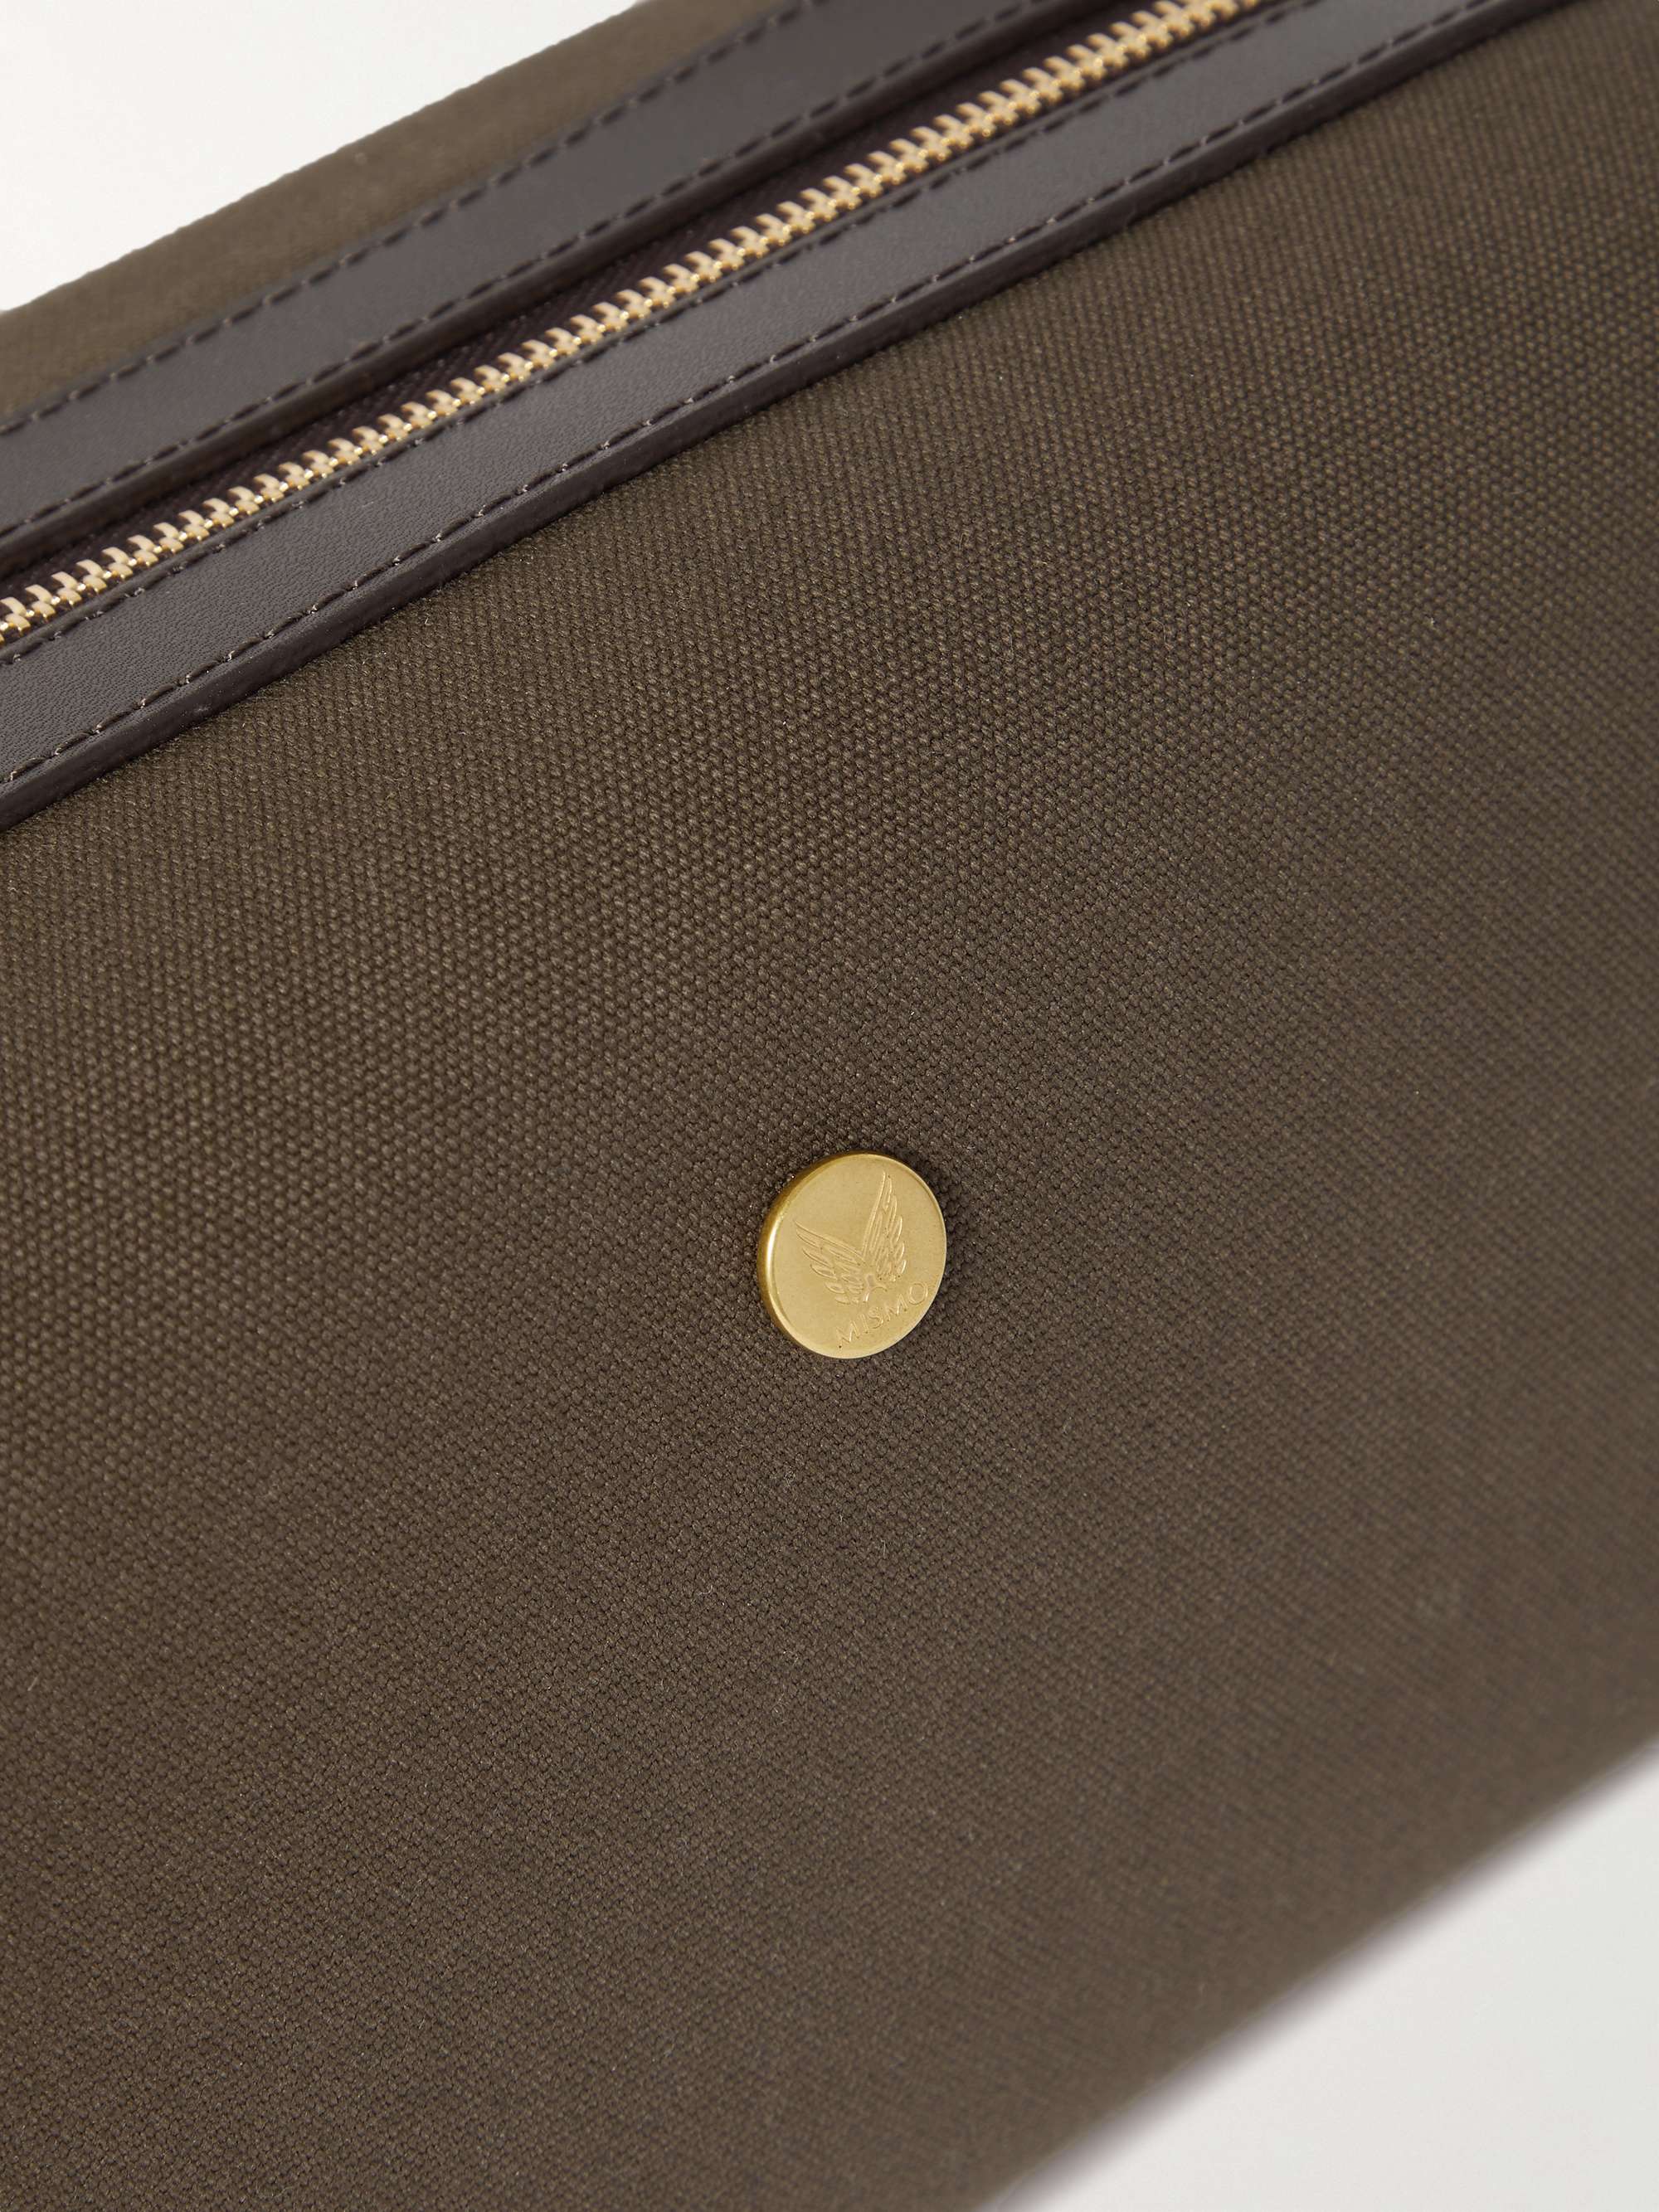 MISMO Leather-Trimmed Canvas Wash Bag